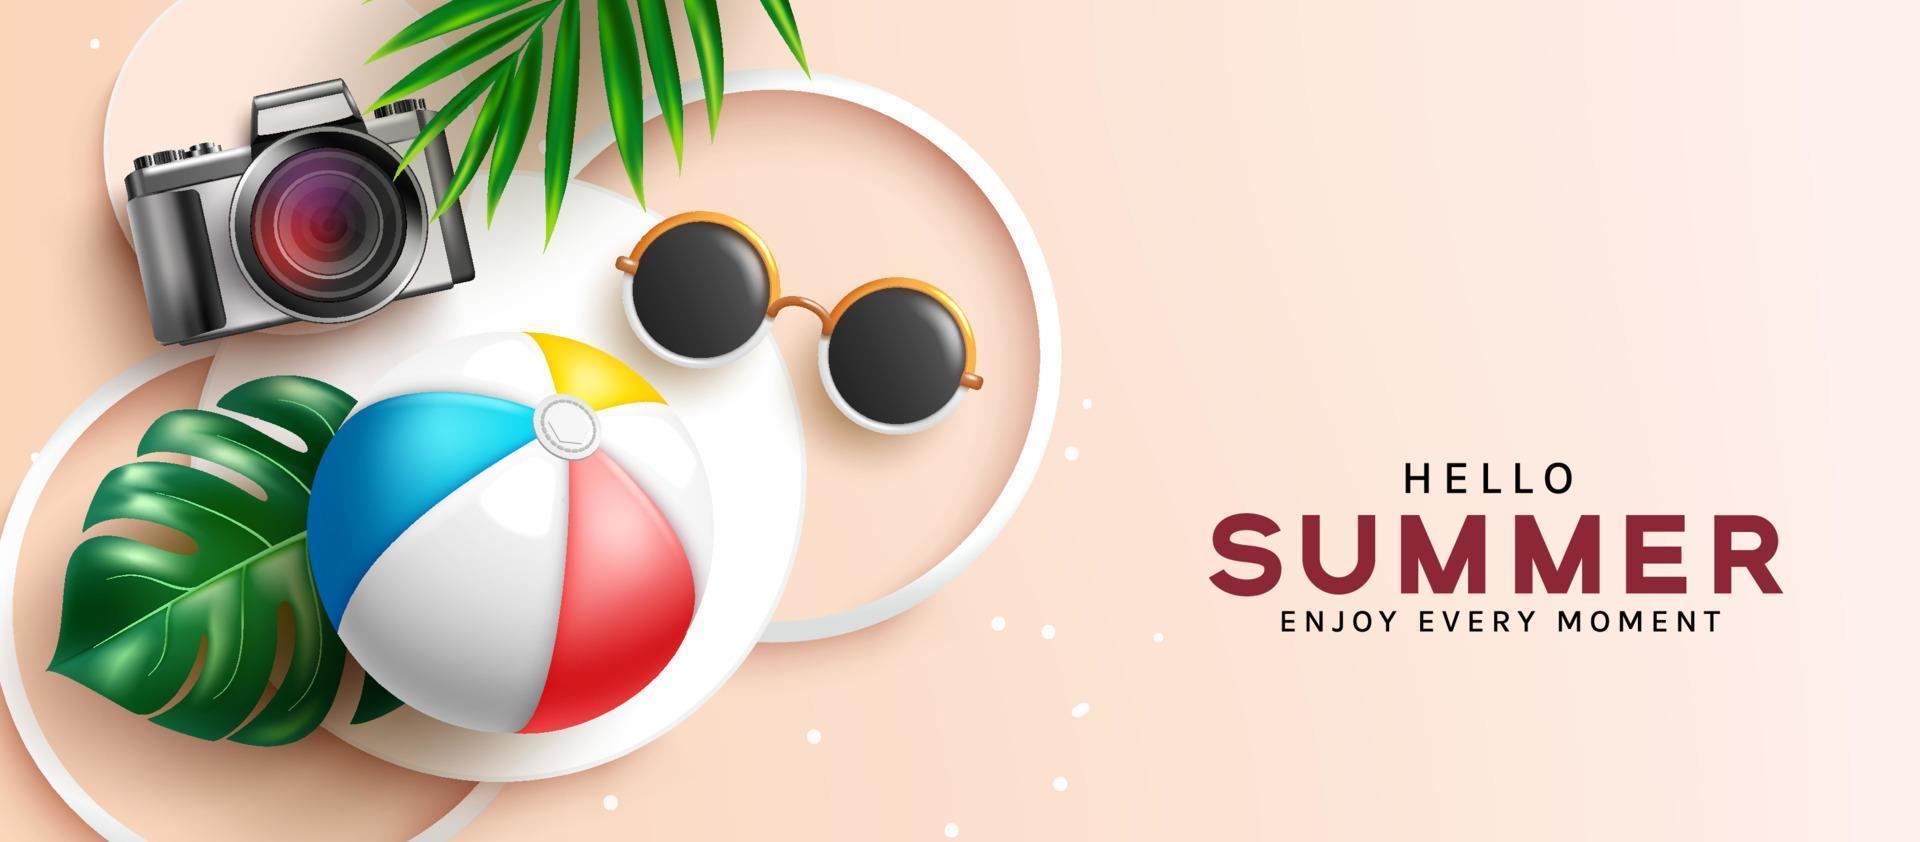 Hello summer vector background design. Hello summer text with beach ball, camera and sunglasses elements in minimalist space for flat lay photography. Vector illustration.